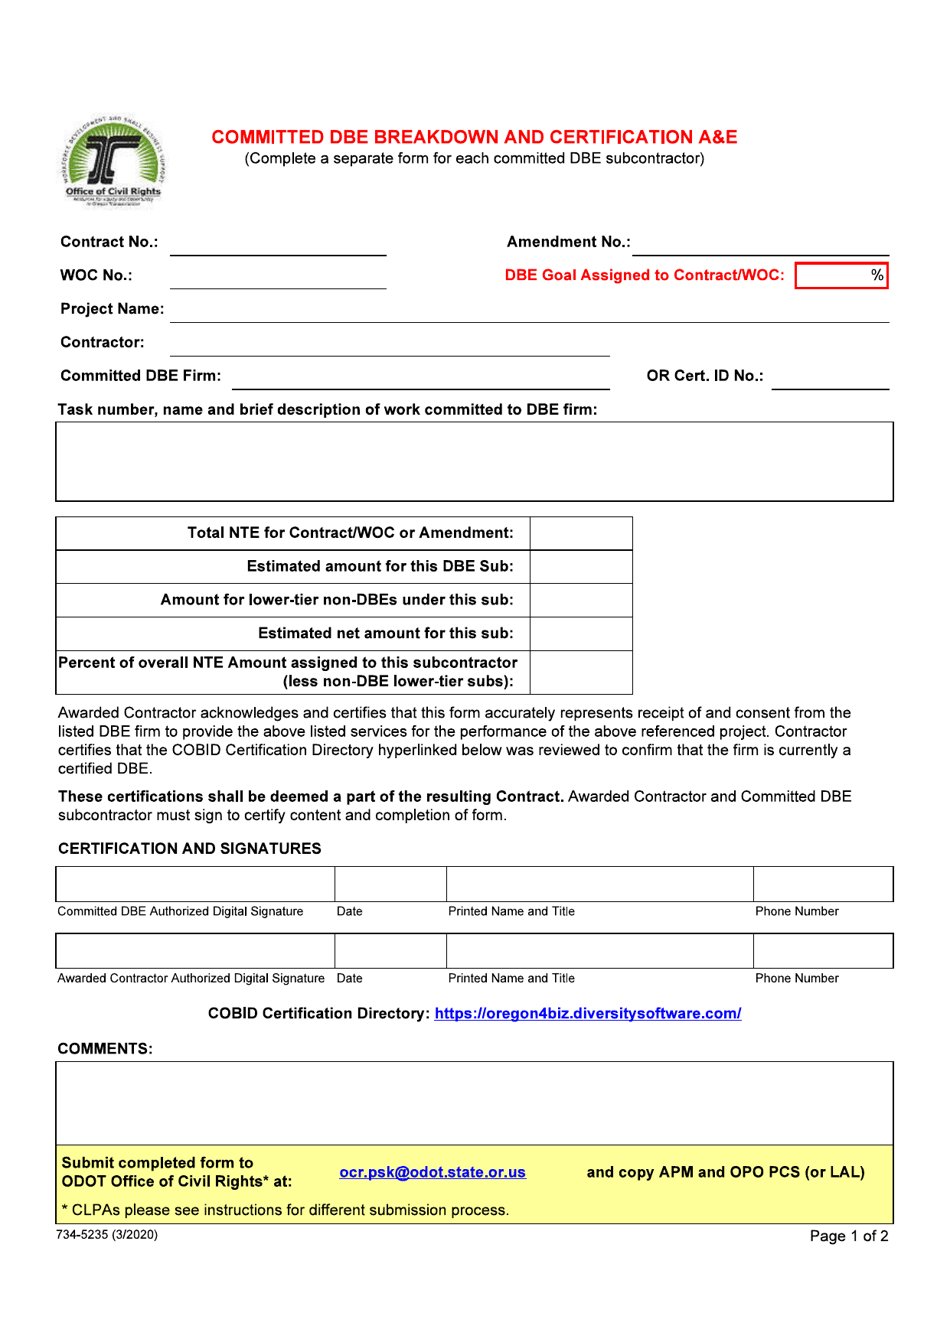 Form 734-5235 Committed Dbe Breakdown and Certification ae - Oregon, Page 1